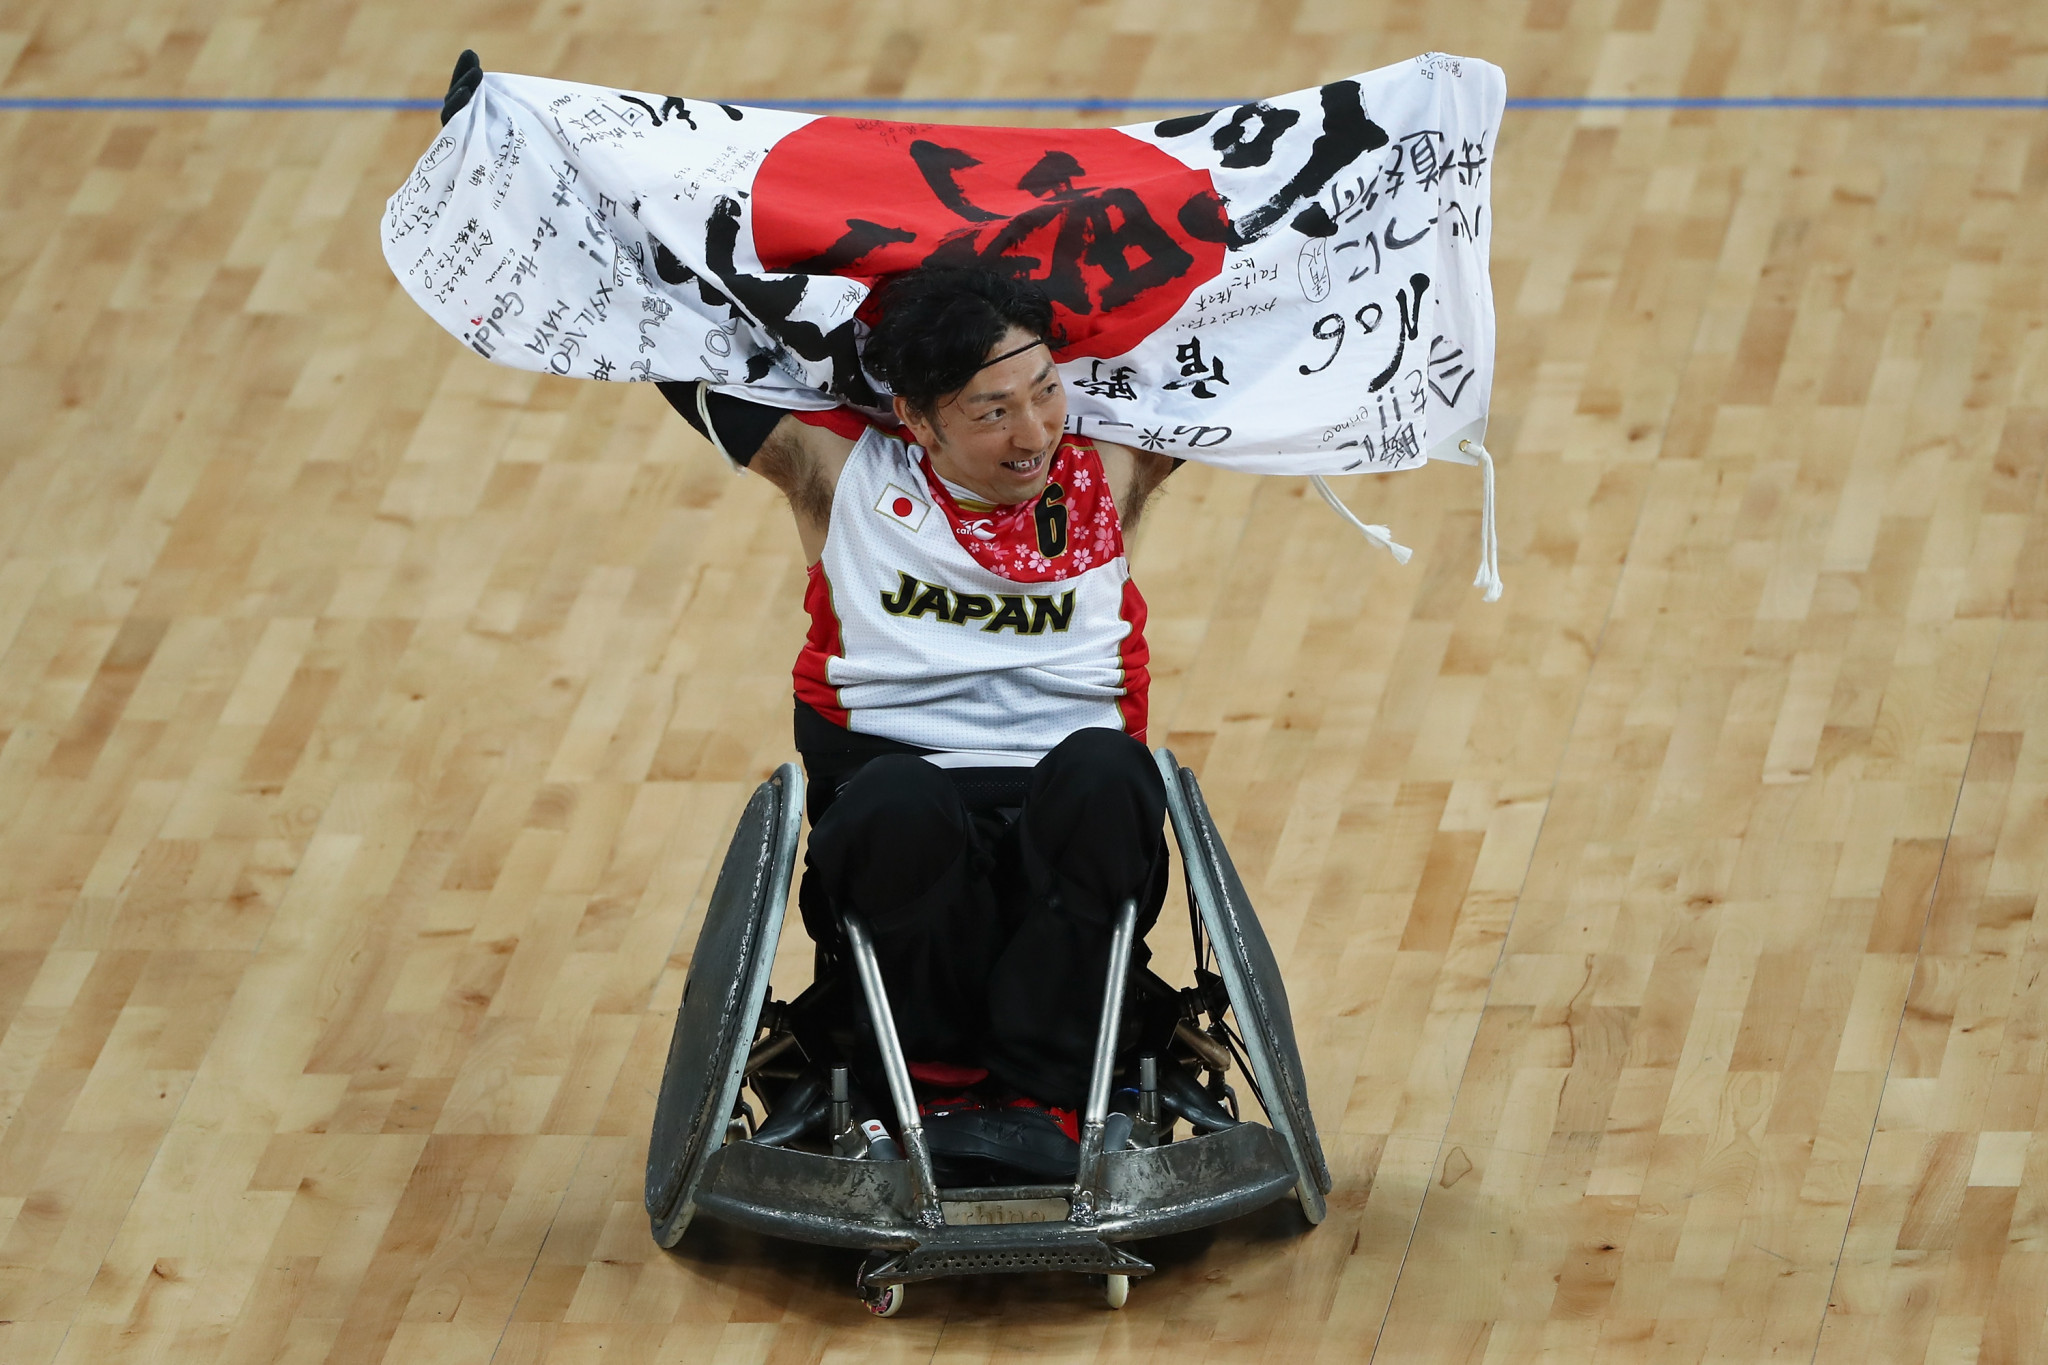 The wheelchair rugby final could provide early cheer for hosts Japan, the reigning world champions ©Getty Images